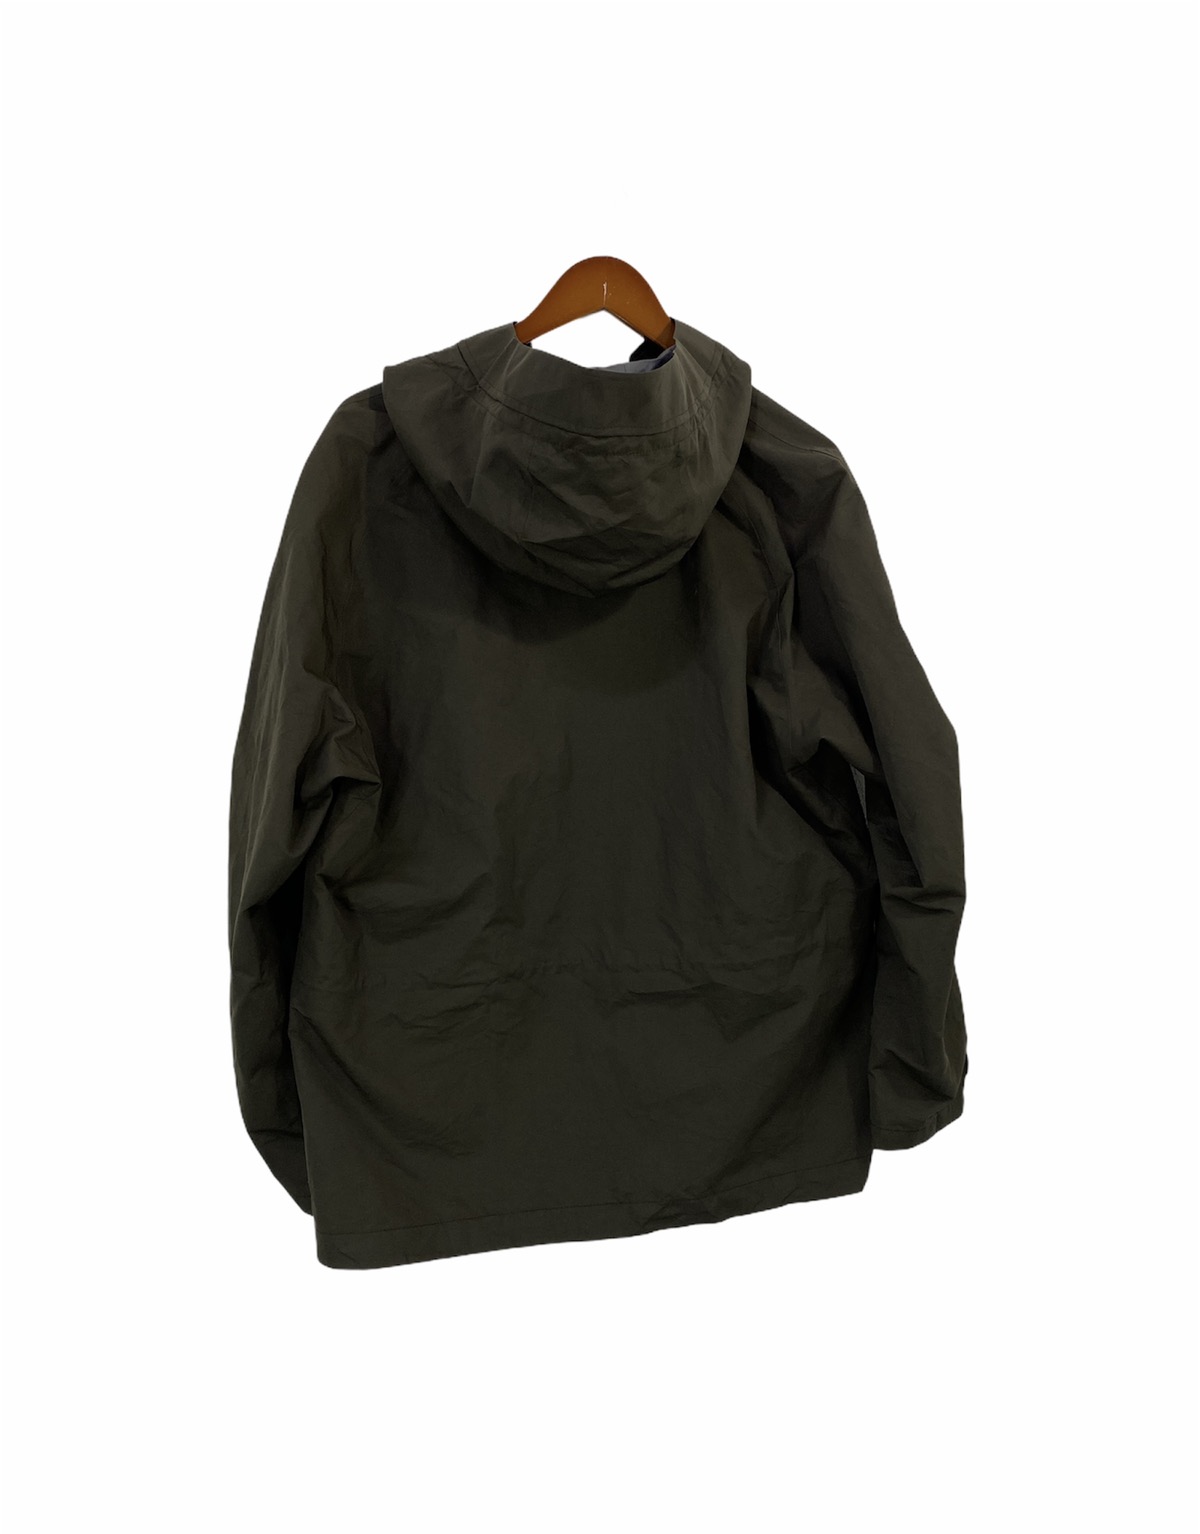 Lemaire X Uniqlo Waterproof Jacket Olive Color with Hoodies - 2